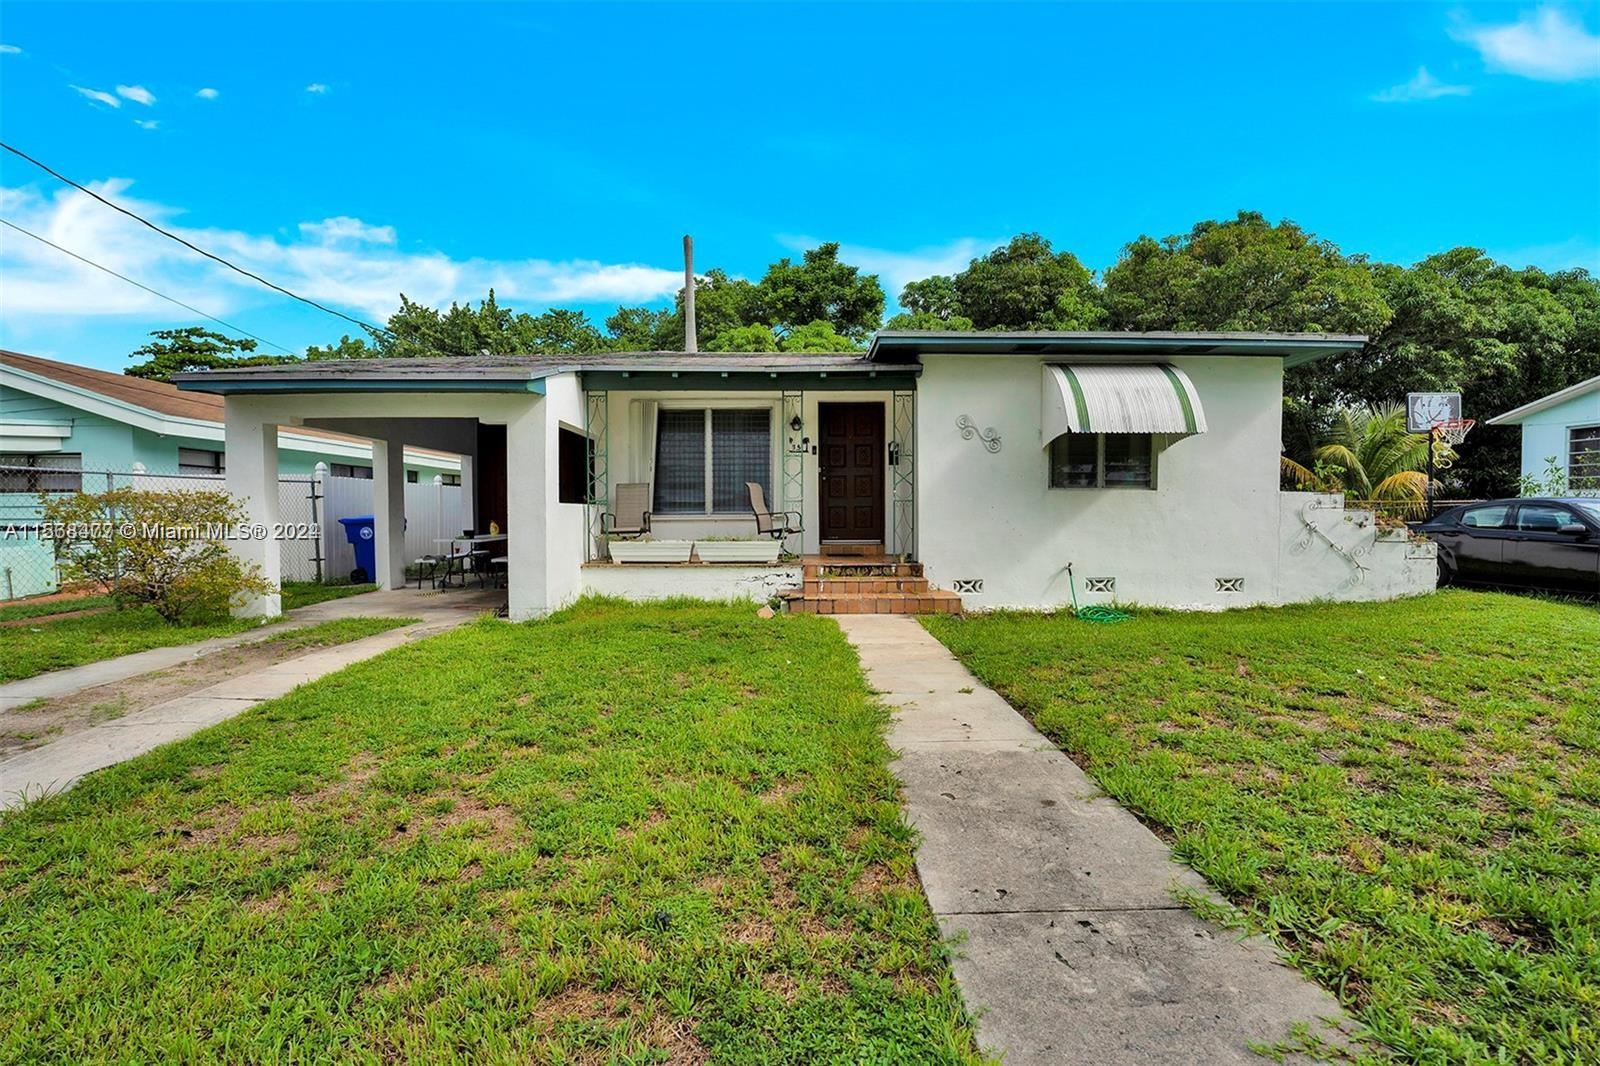 75 Nw 41st St St, Miami, Broward County, Florida - 8 Bedrooms  
7 Bathrooms - 